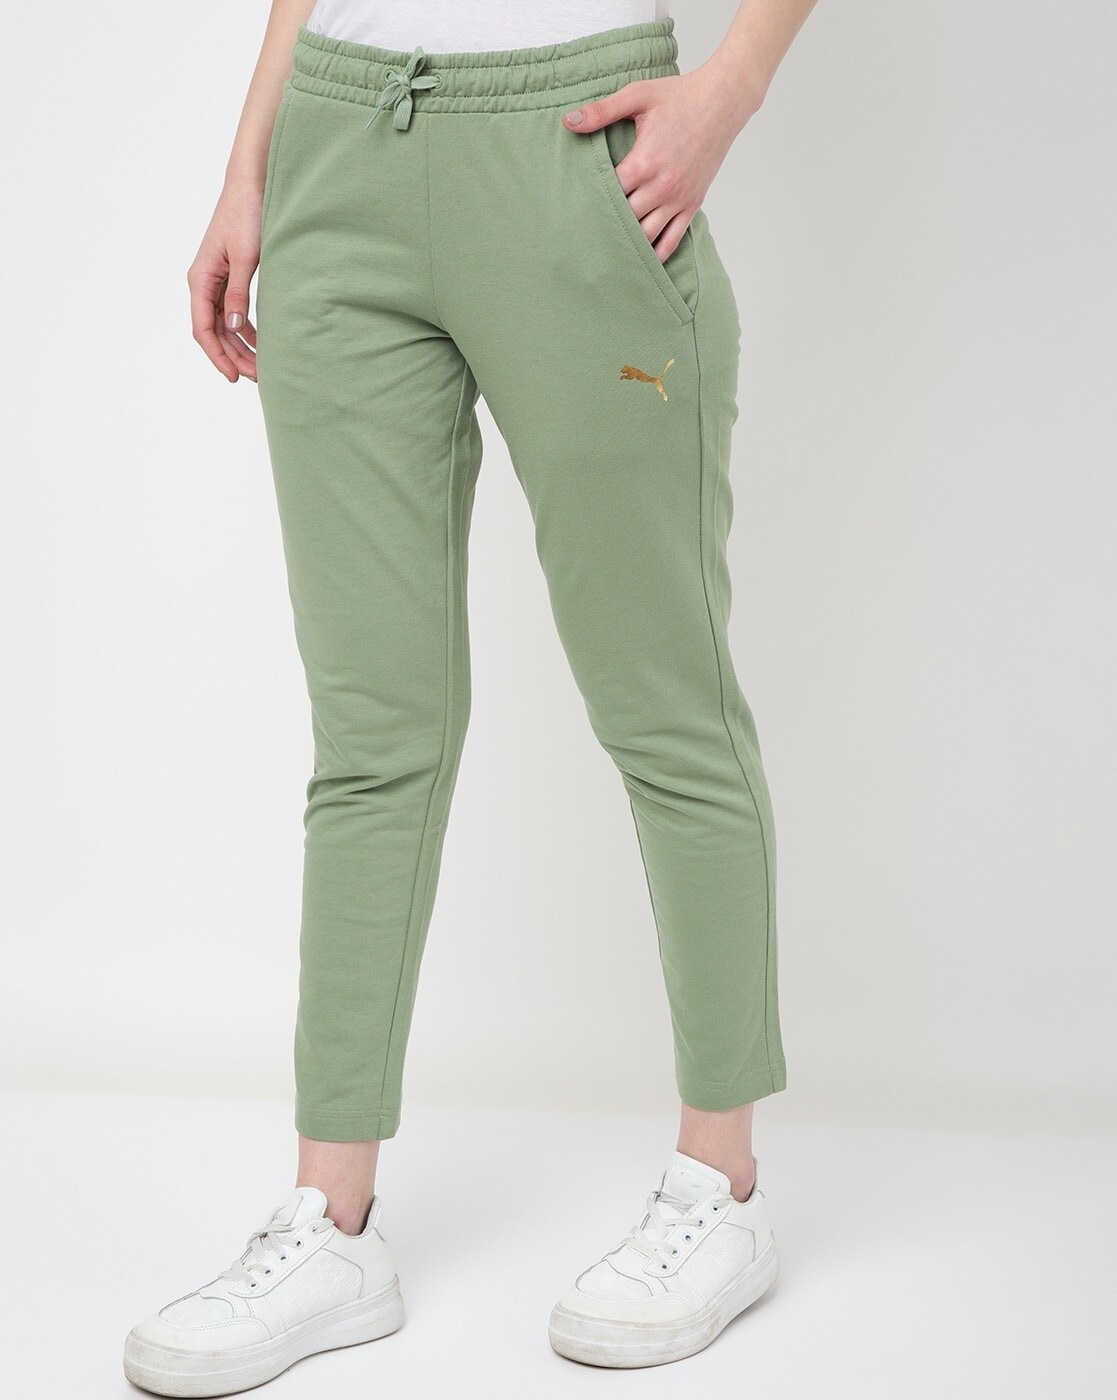 Buy Grey Track Pants for Women by Outryt Online | Ajio.com